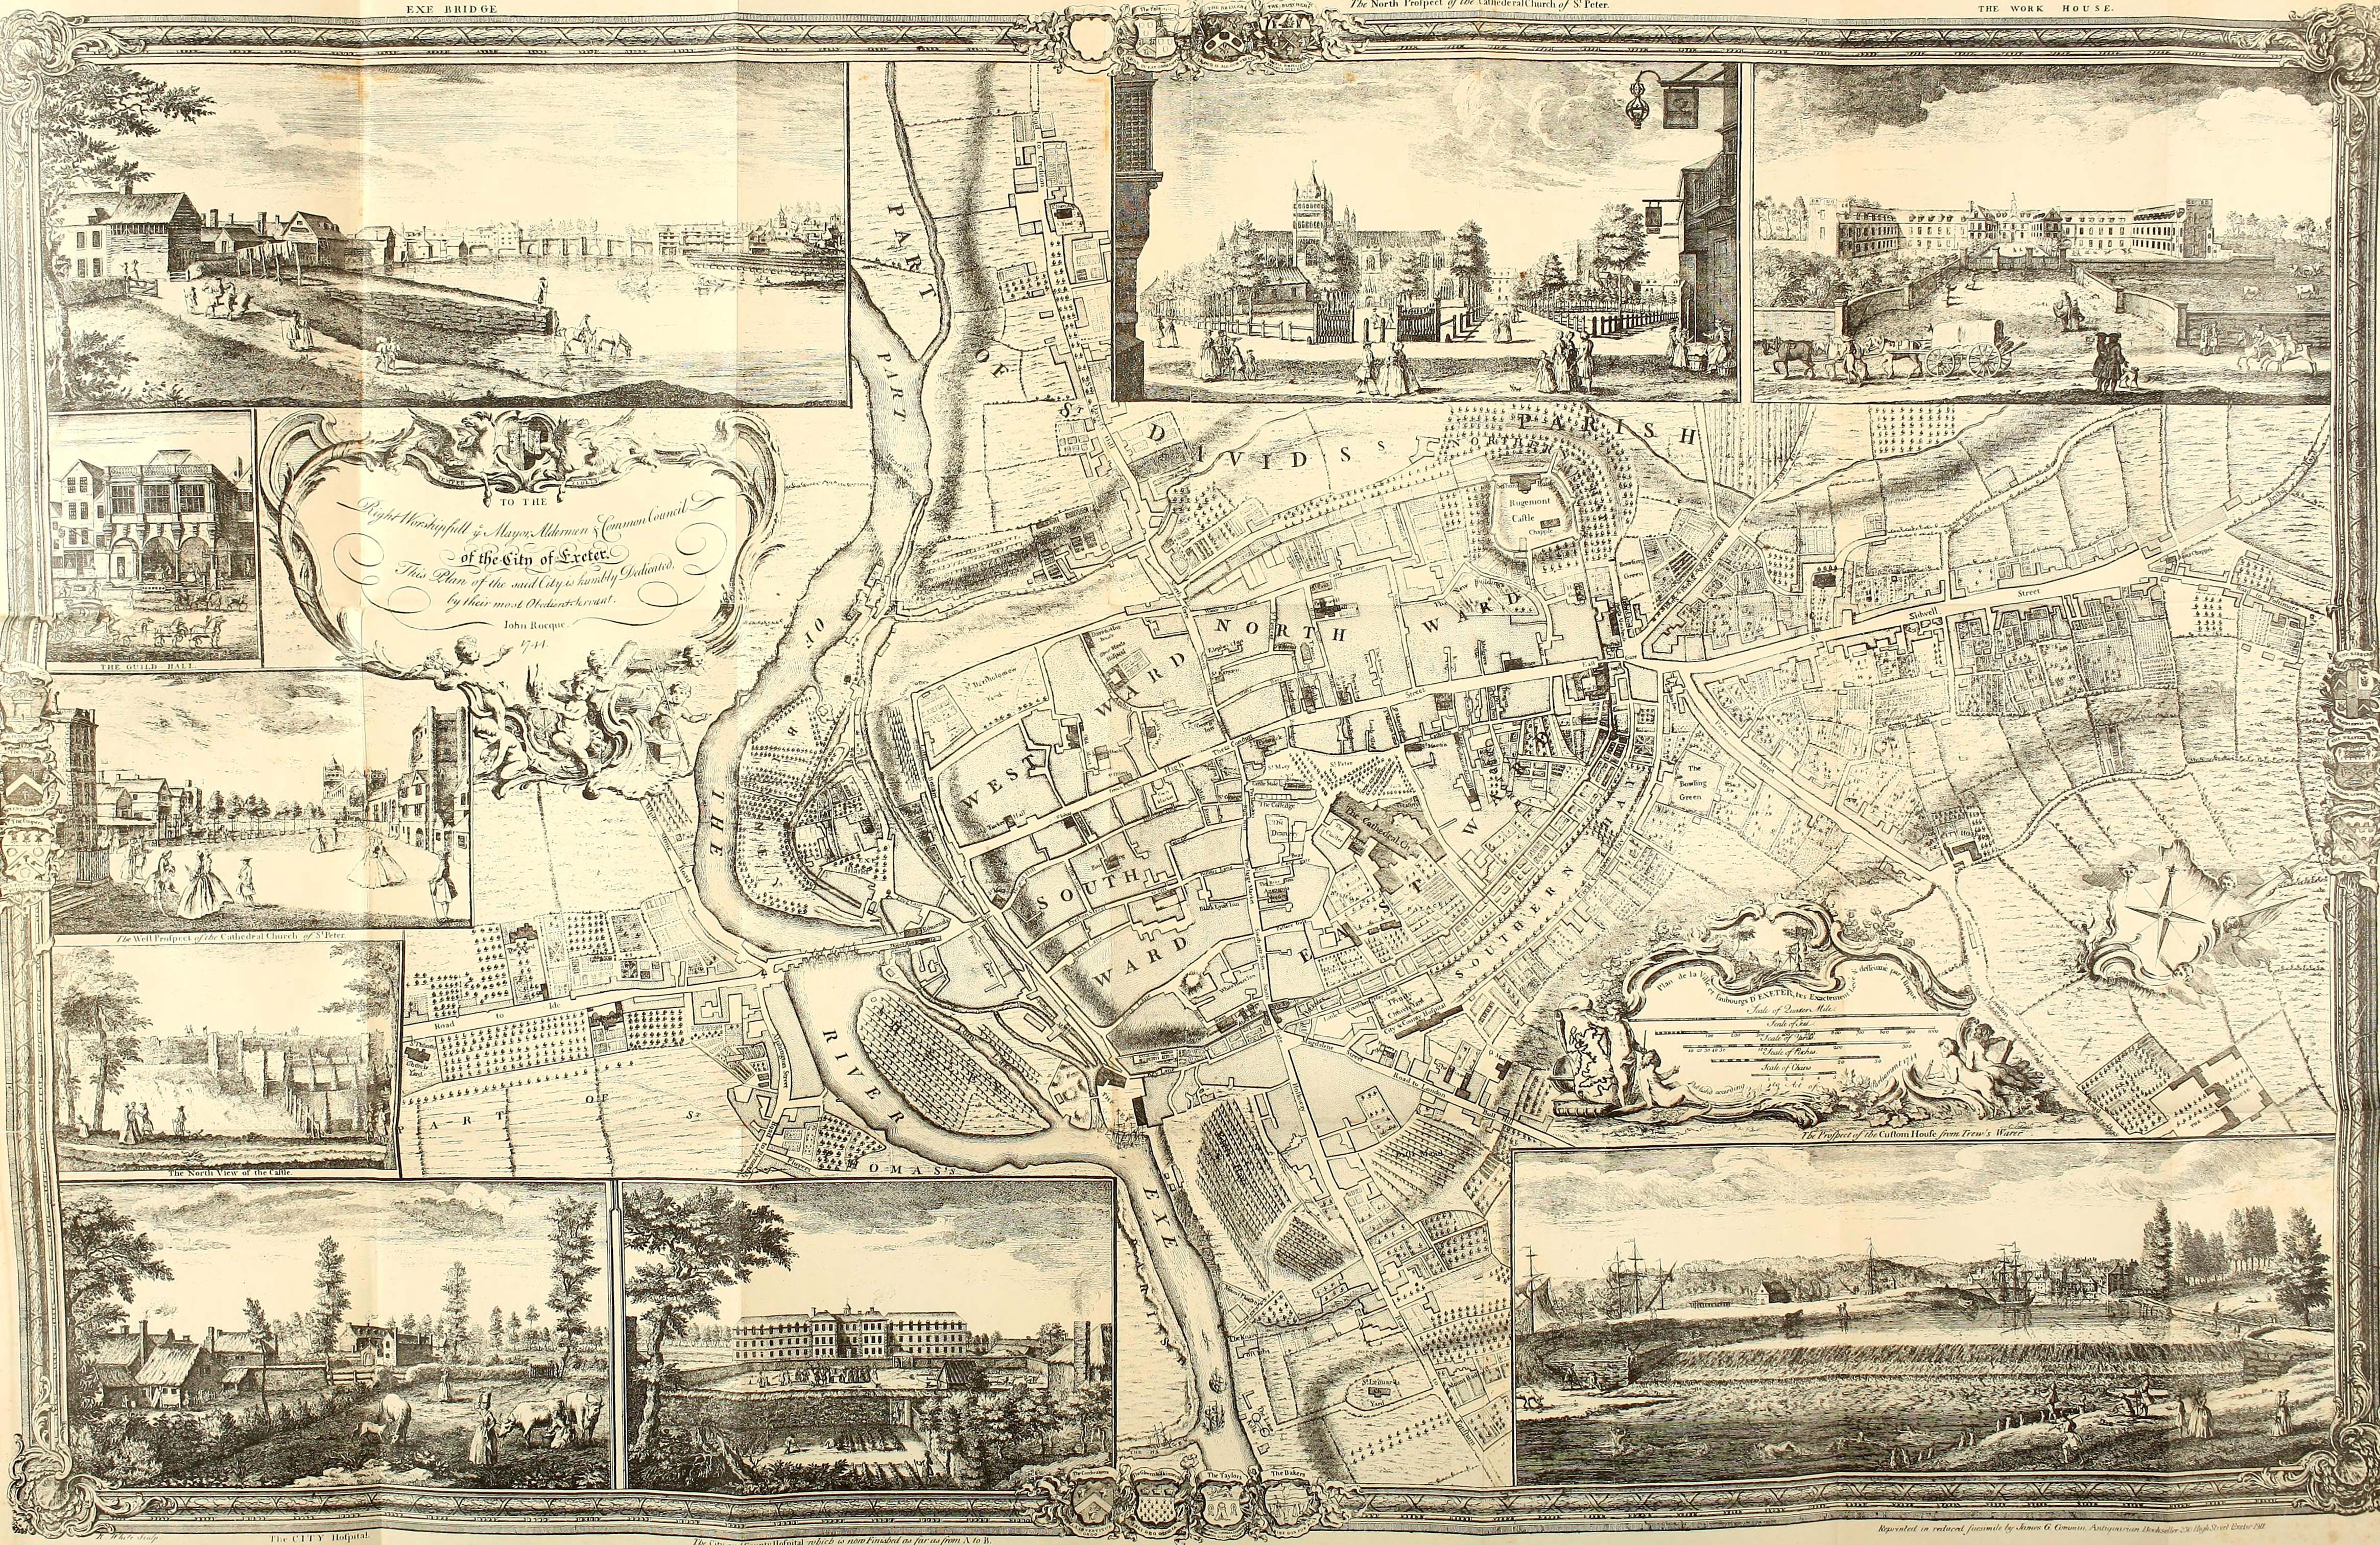 Roque's map of Exeter 1744